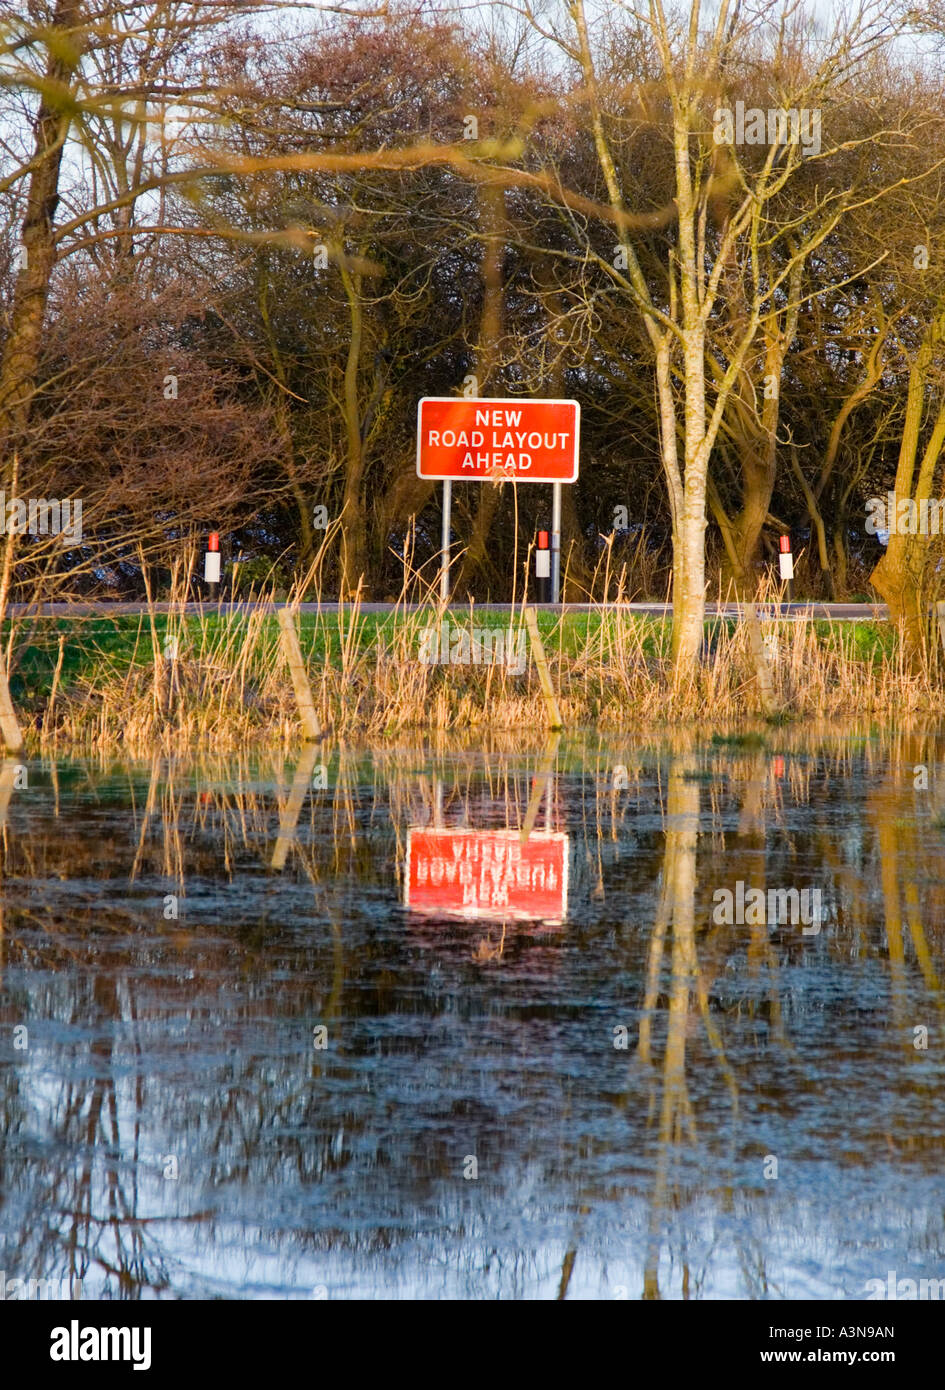 Road sign. New road layout ahead, reflected in a flooded field next to the road. Dorset. UK. Stock Photo